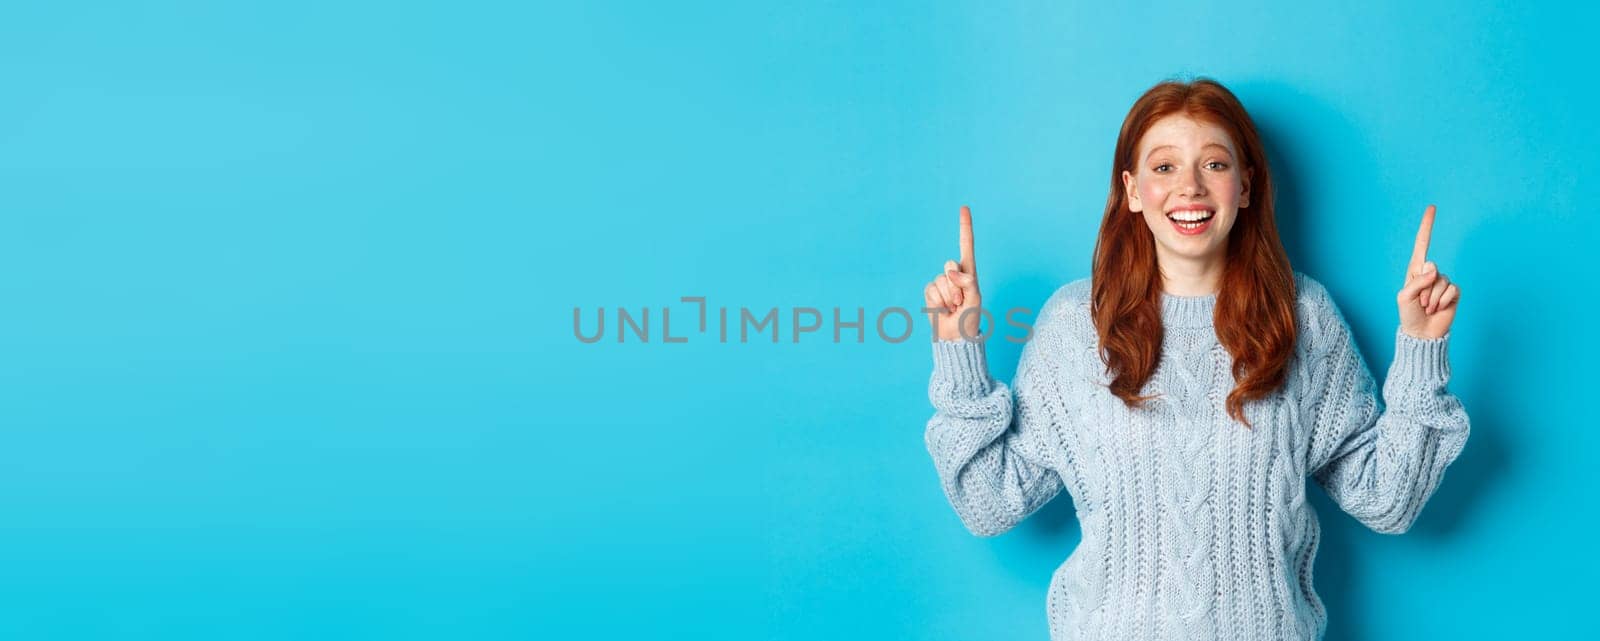 Winter holidays and people concept. Beautiful teenage girl with red hair, wearing sweater, pointing fingers up at logo and smiling, showing advertisement, blue background by Benzoix